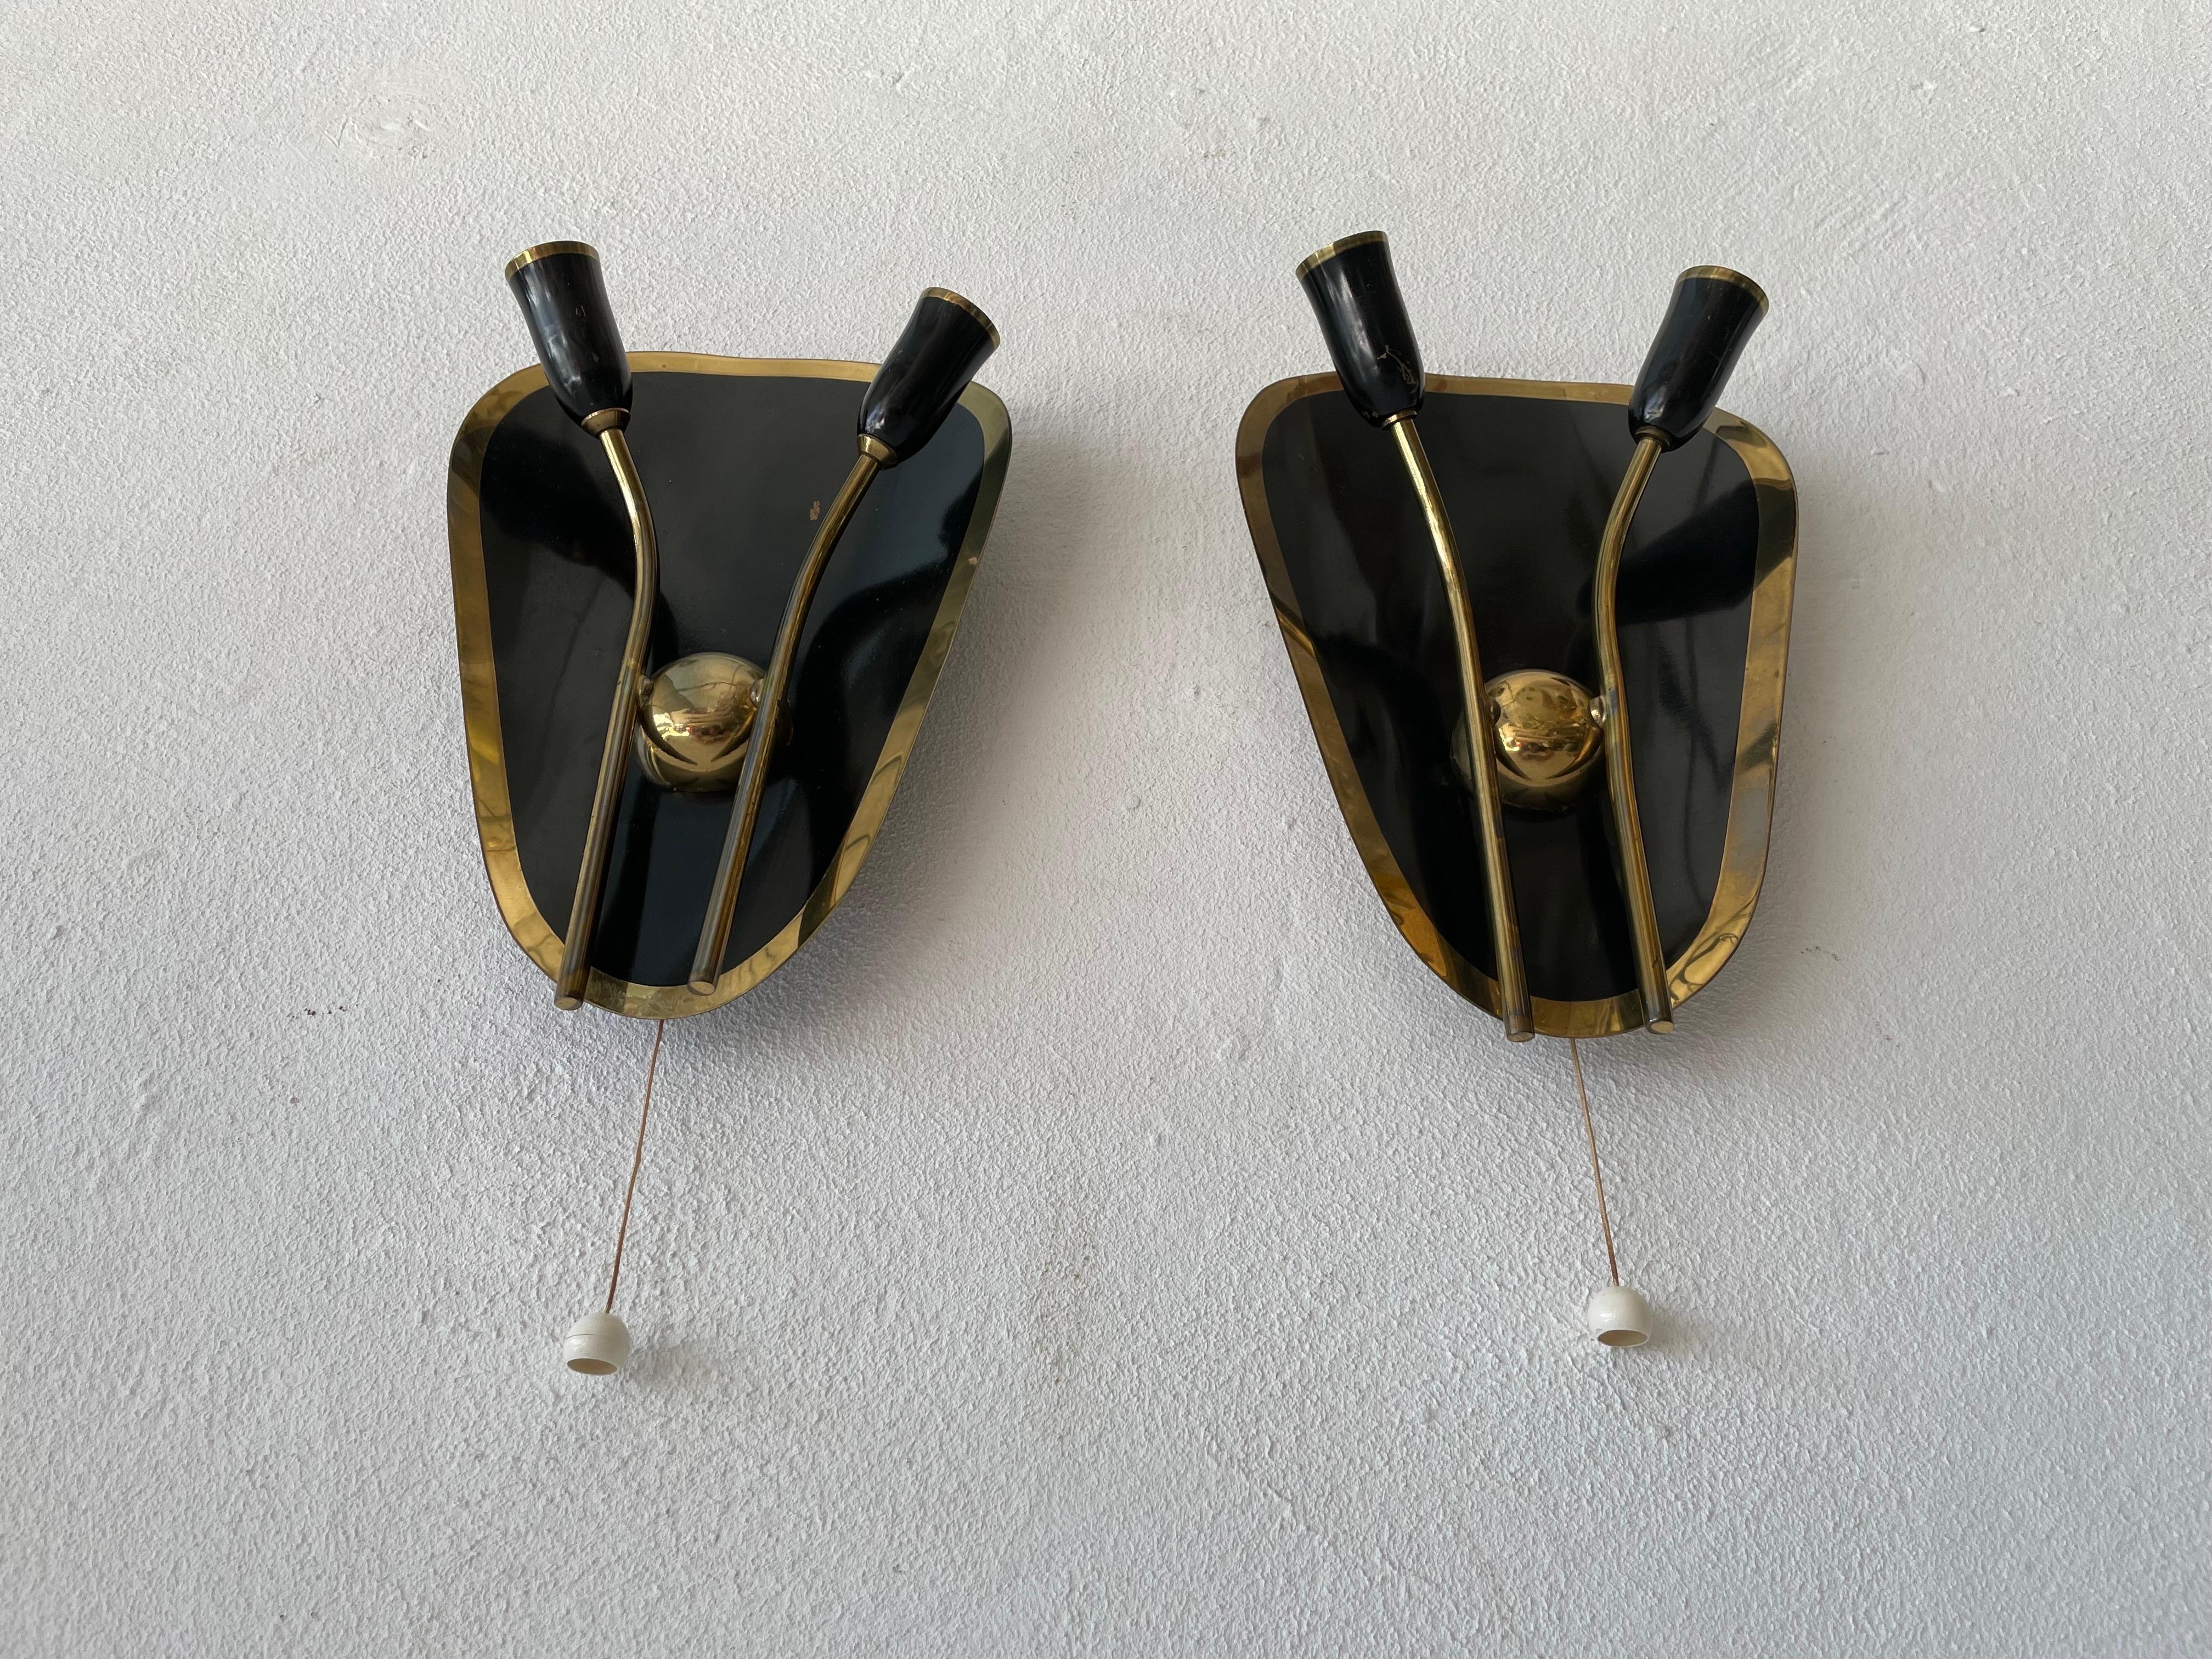 Mid-Century Modern Exclusive Atomic Design Brass Black Metal Pair of Sconces, 1950s, Germany For Sale